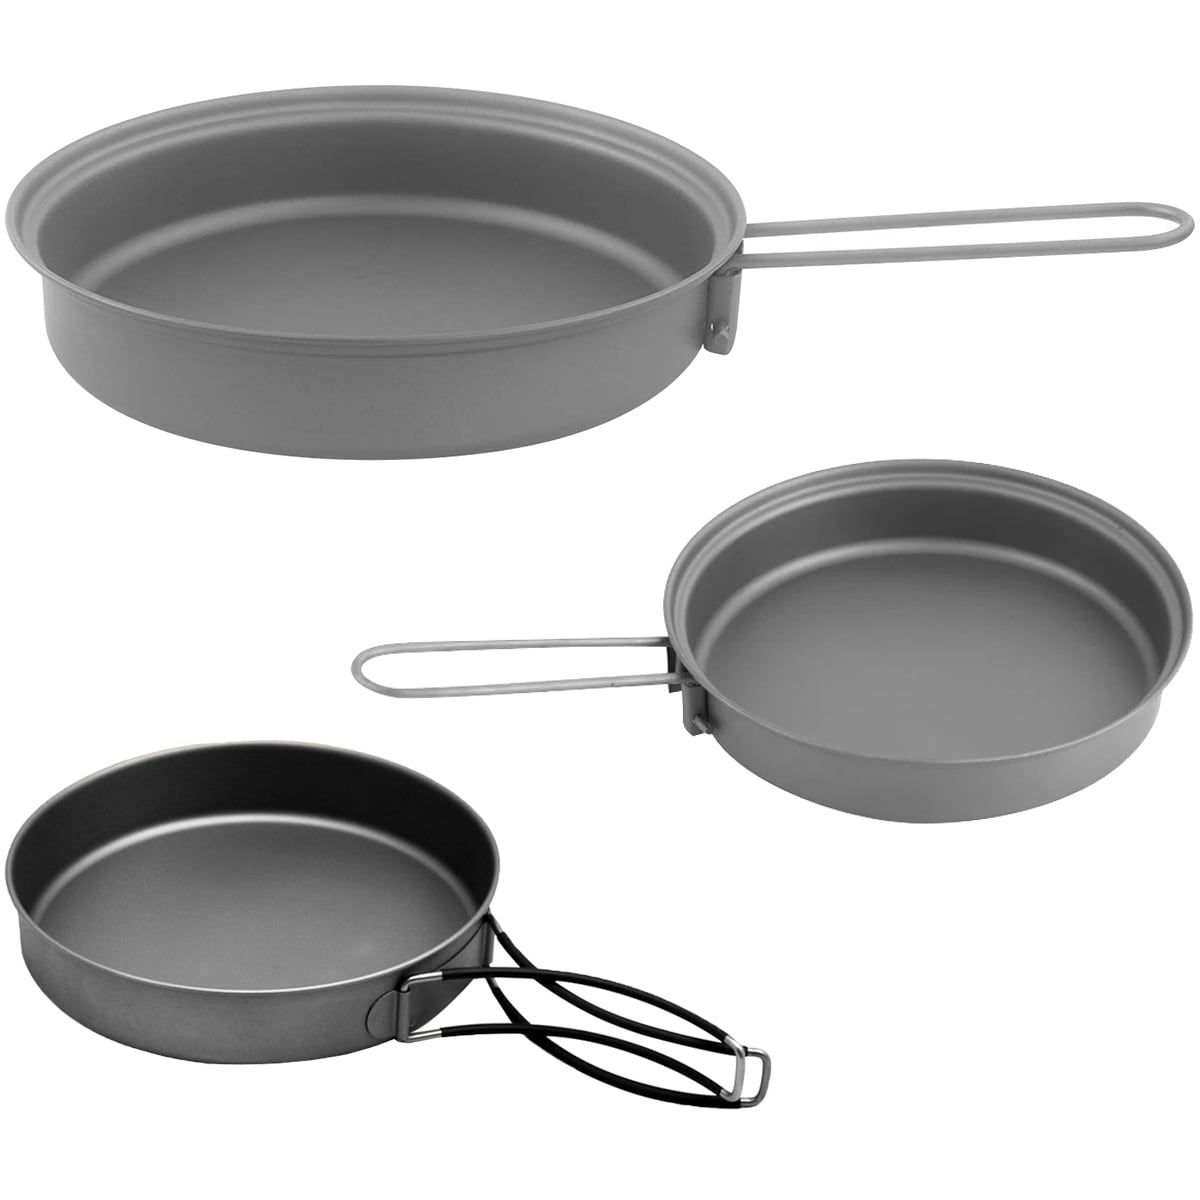 https://ak1.ostkcdn.com/images/products/is/images/direct/b8e5b99dd8e927d54ac661001ce6d8d64d1b154d/TOAKS-Lightweight-Titanium-Frying-Pan-with-Foldable-Handle---Outdoor-Camping.jpg